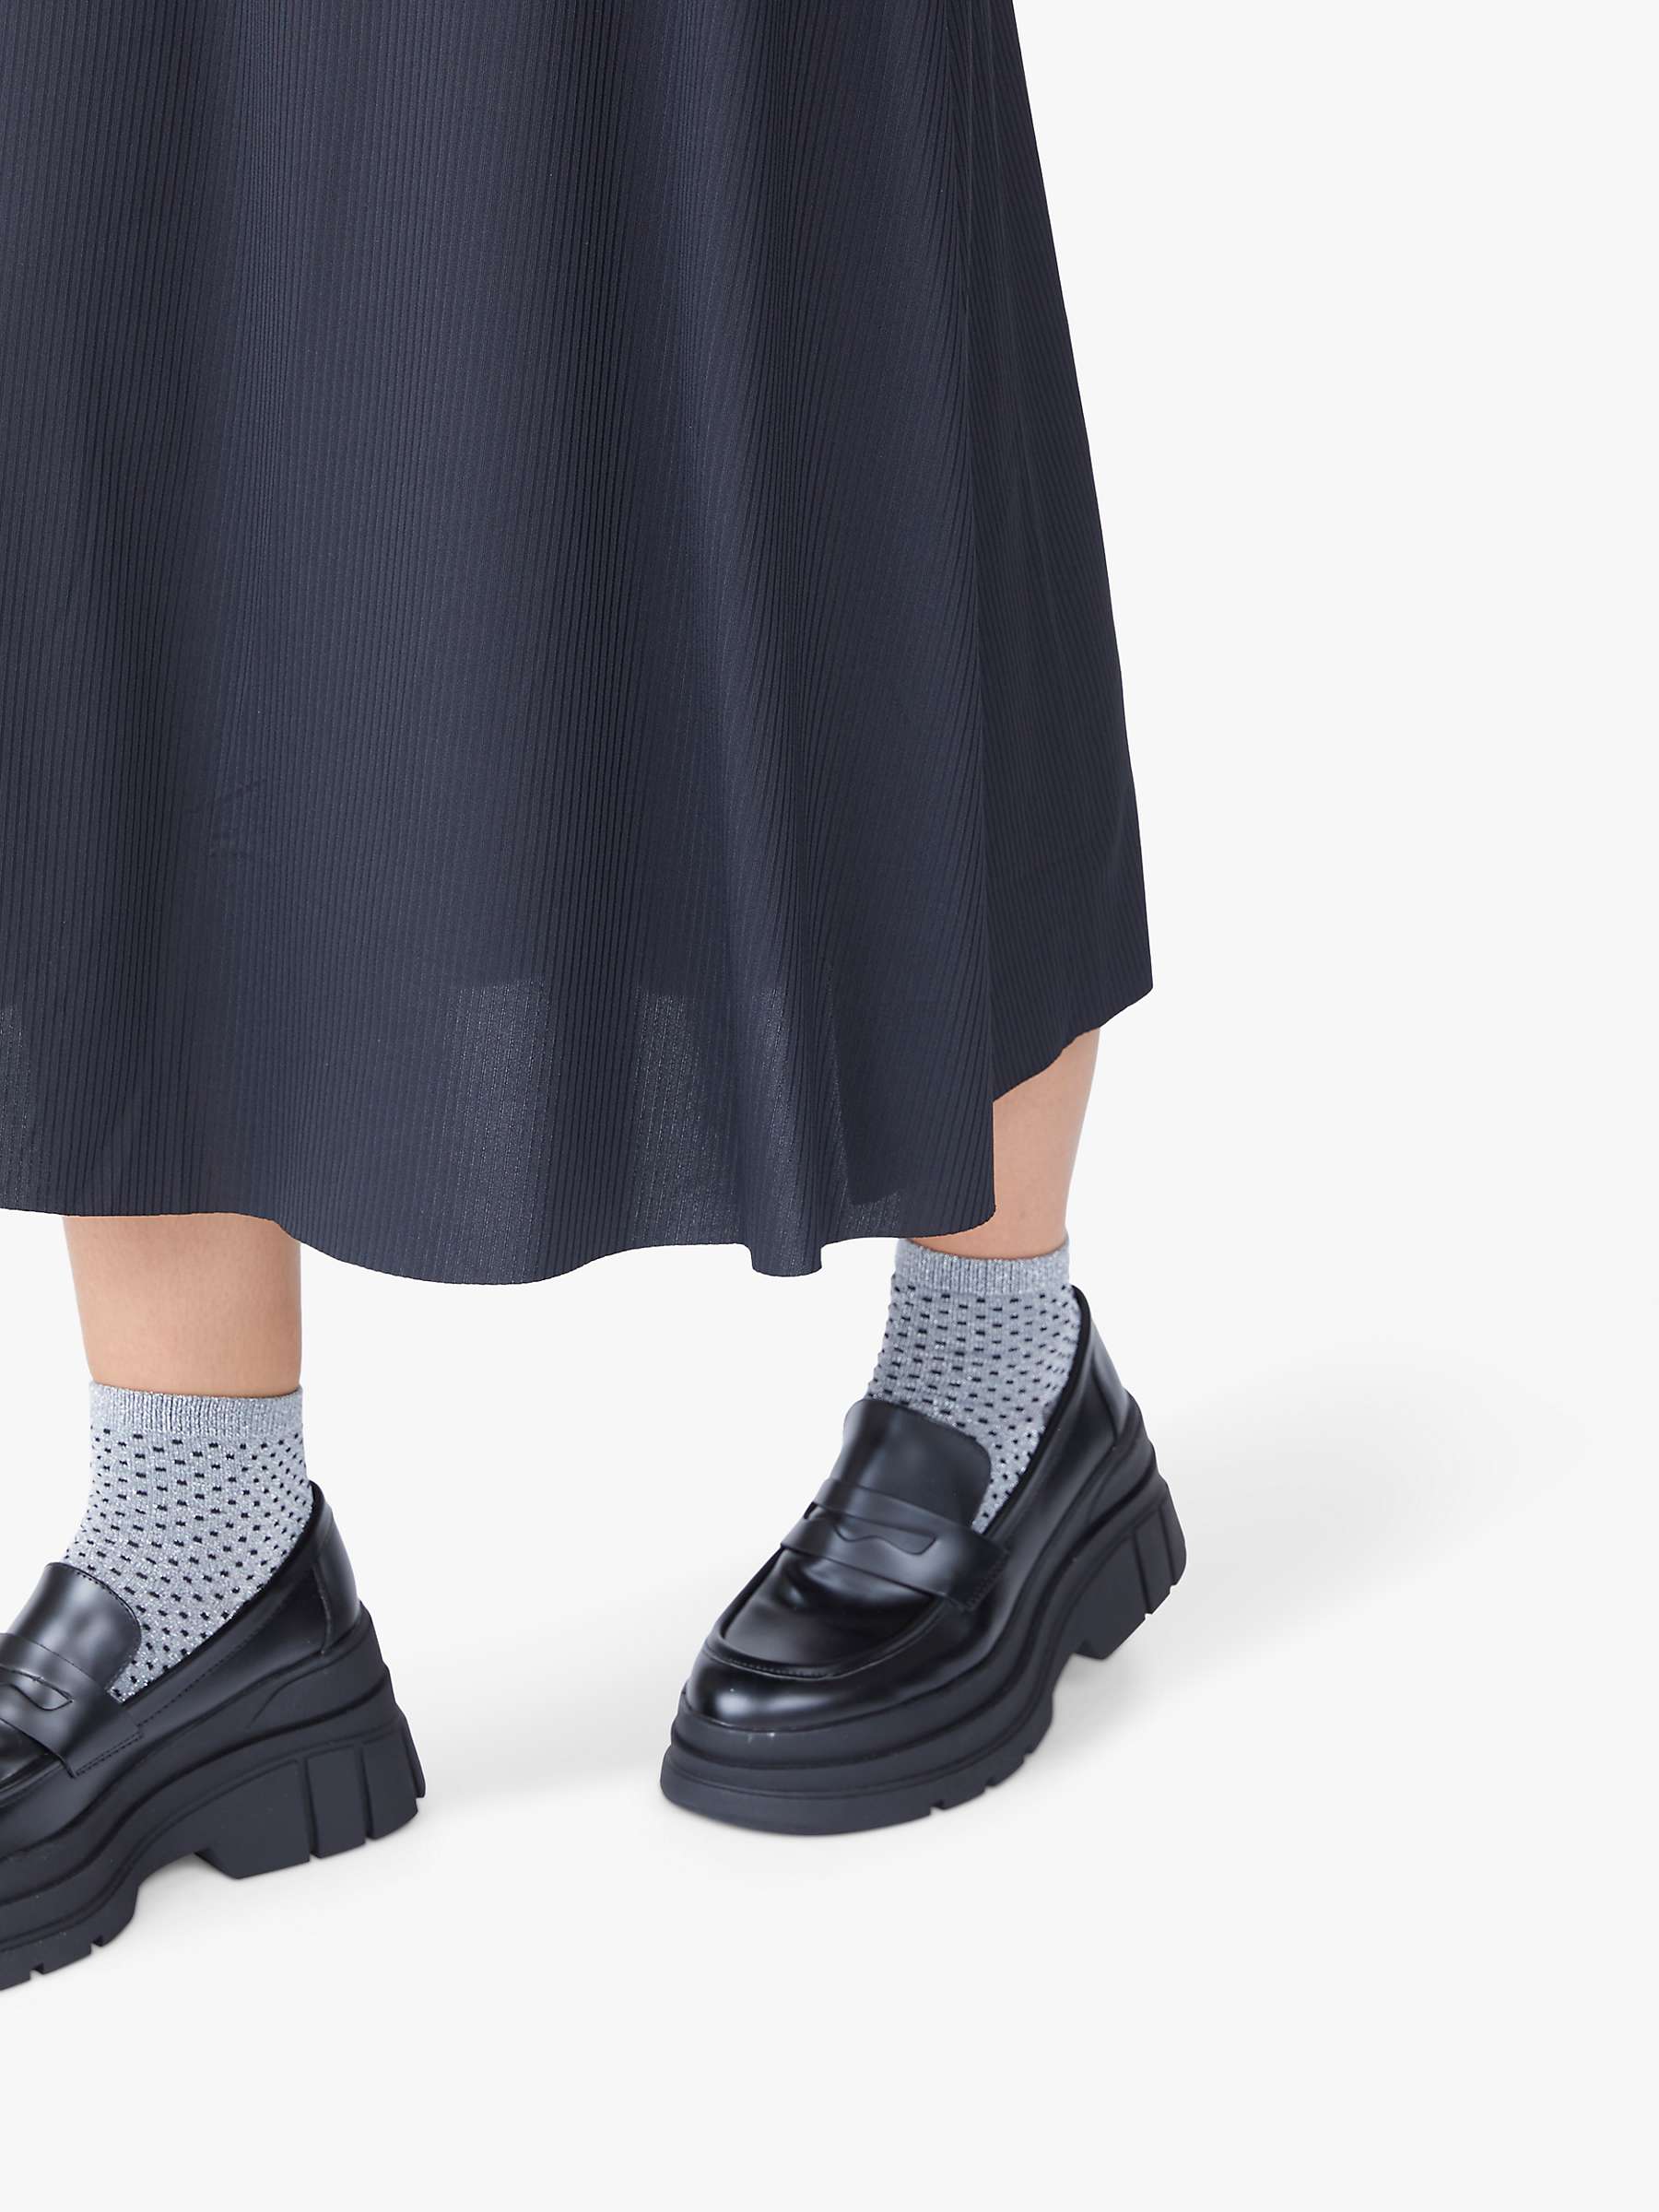 Buy Sisters Point Midi A-Line Skirt, Black Online at johnlewis.com